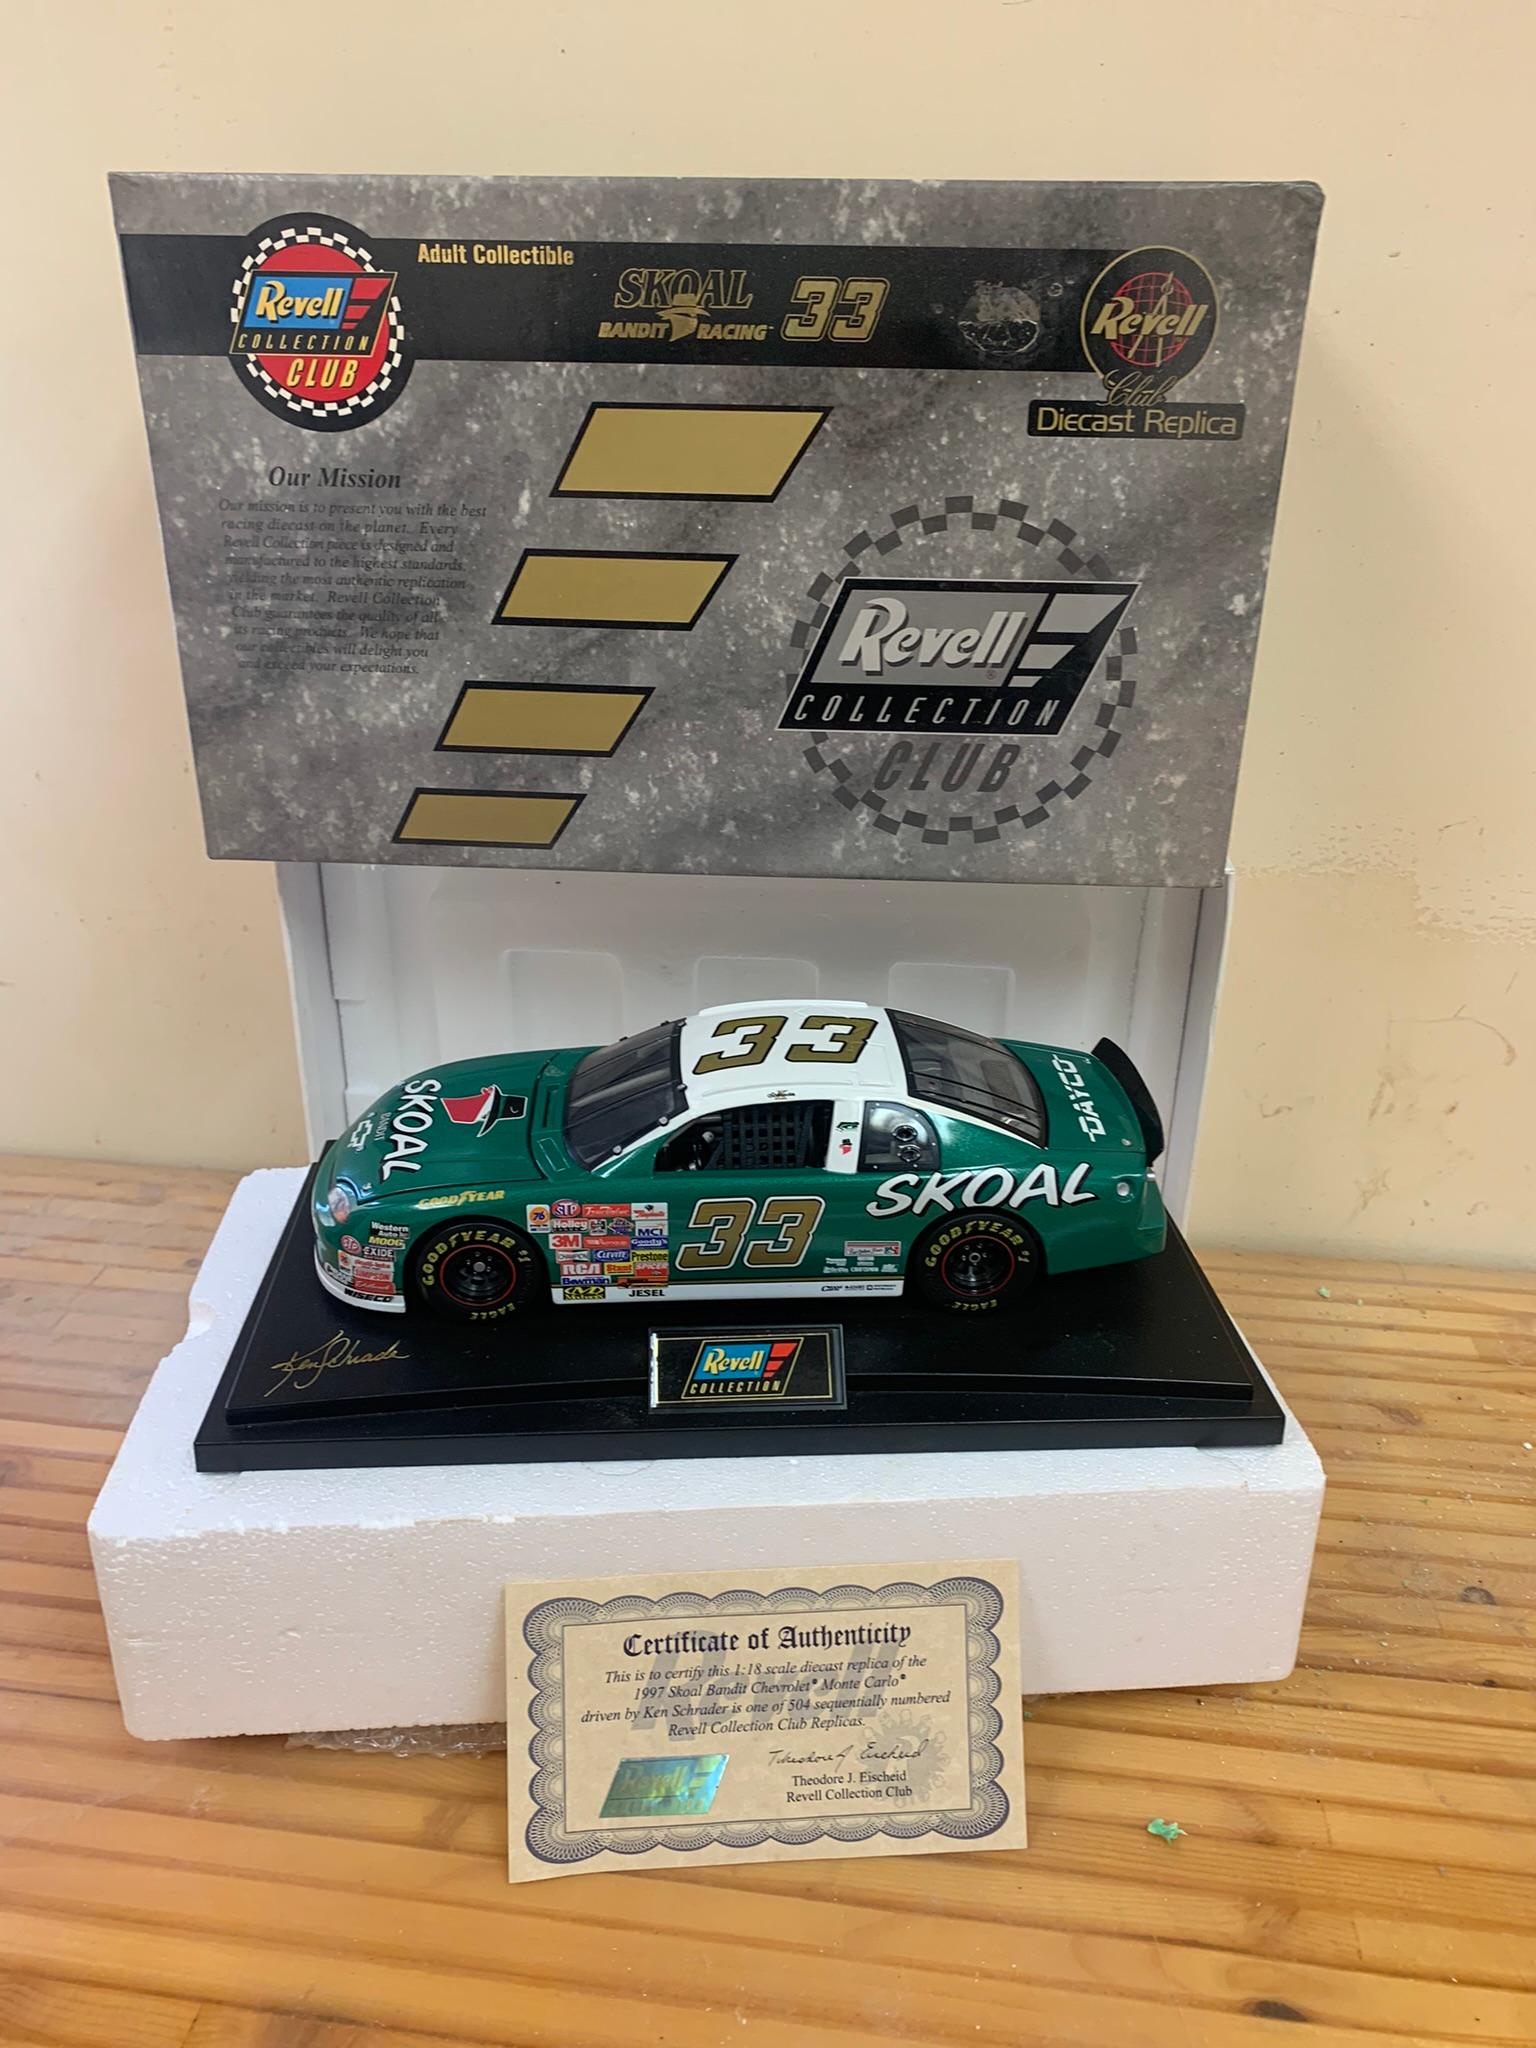 Revell Collection Club  Diecast Replica Skoal Bandit Racing Car